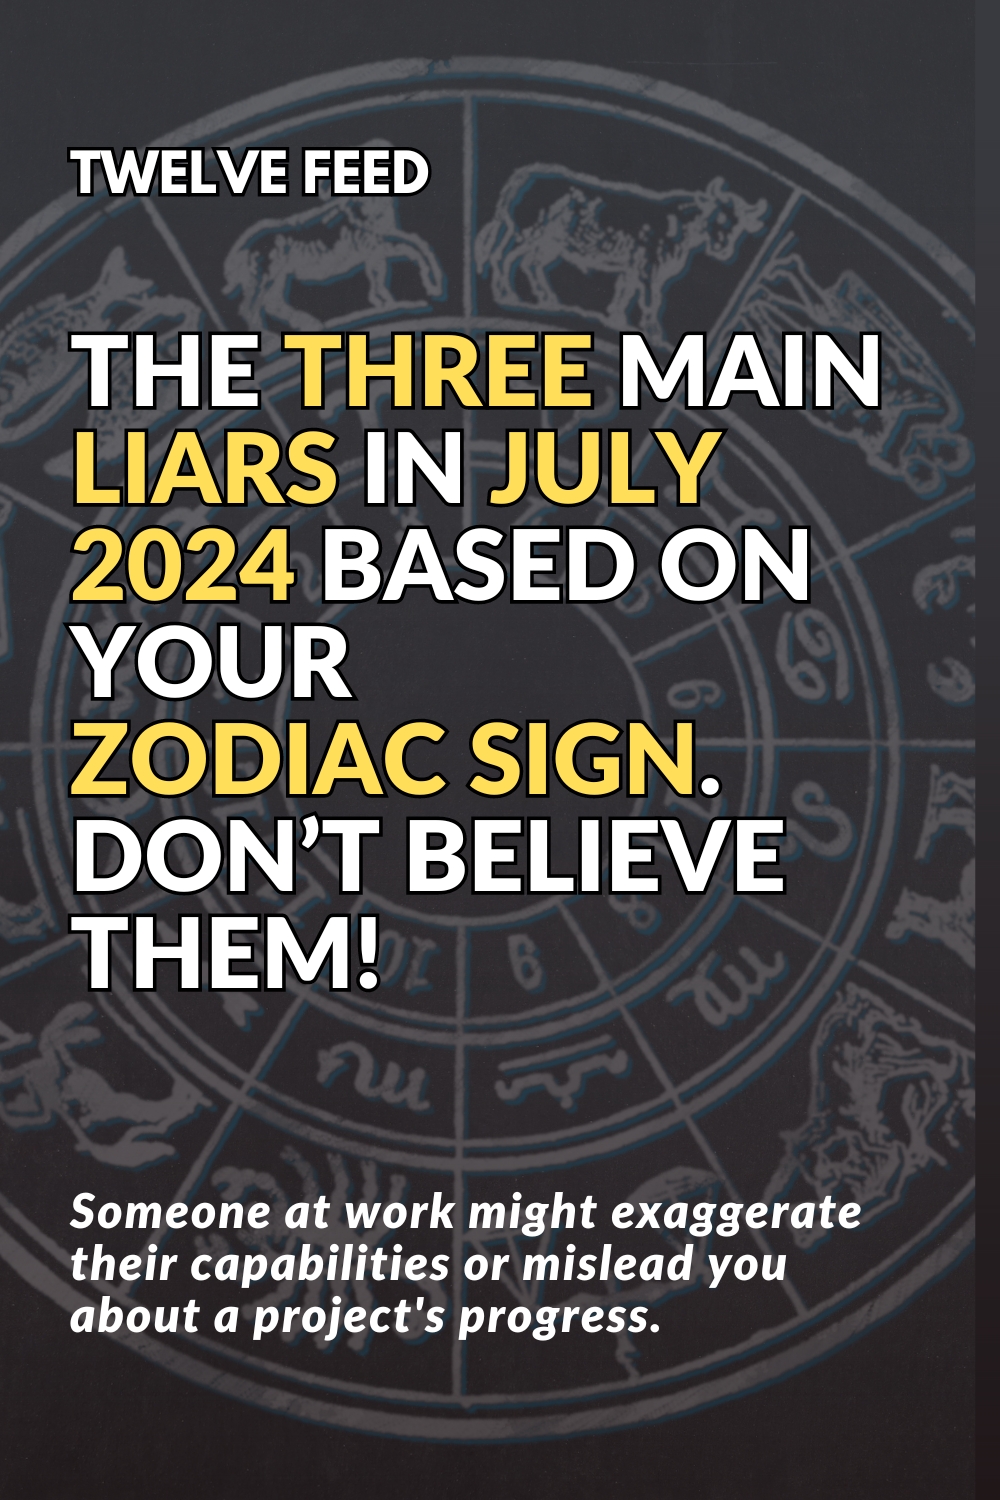 The Three Main Liars In July 2024 Based On Your Zodiac Sign. Don’t Believe Them!